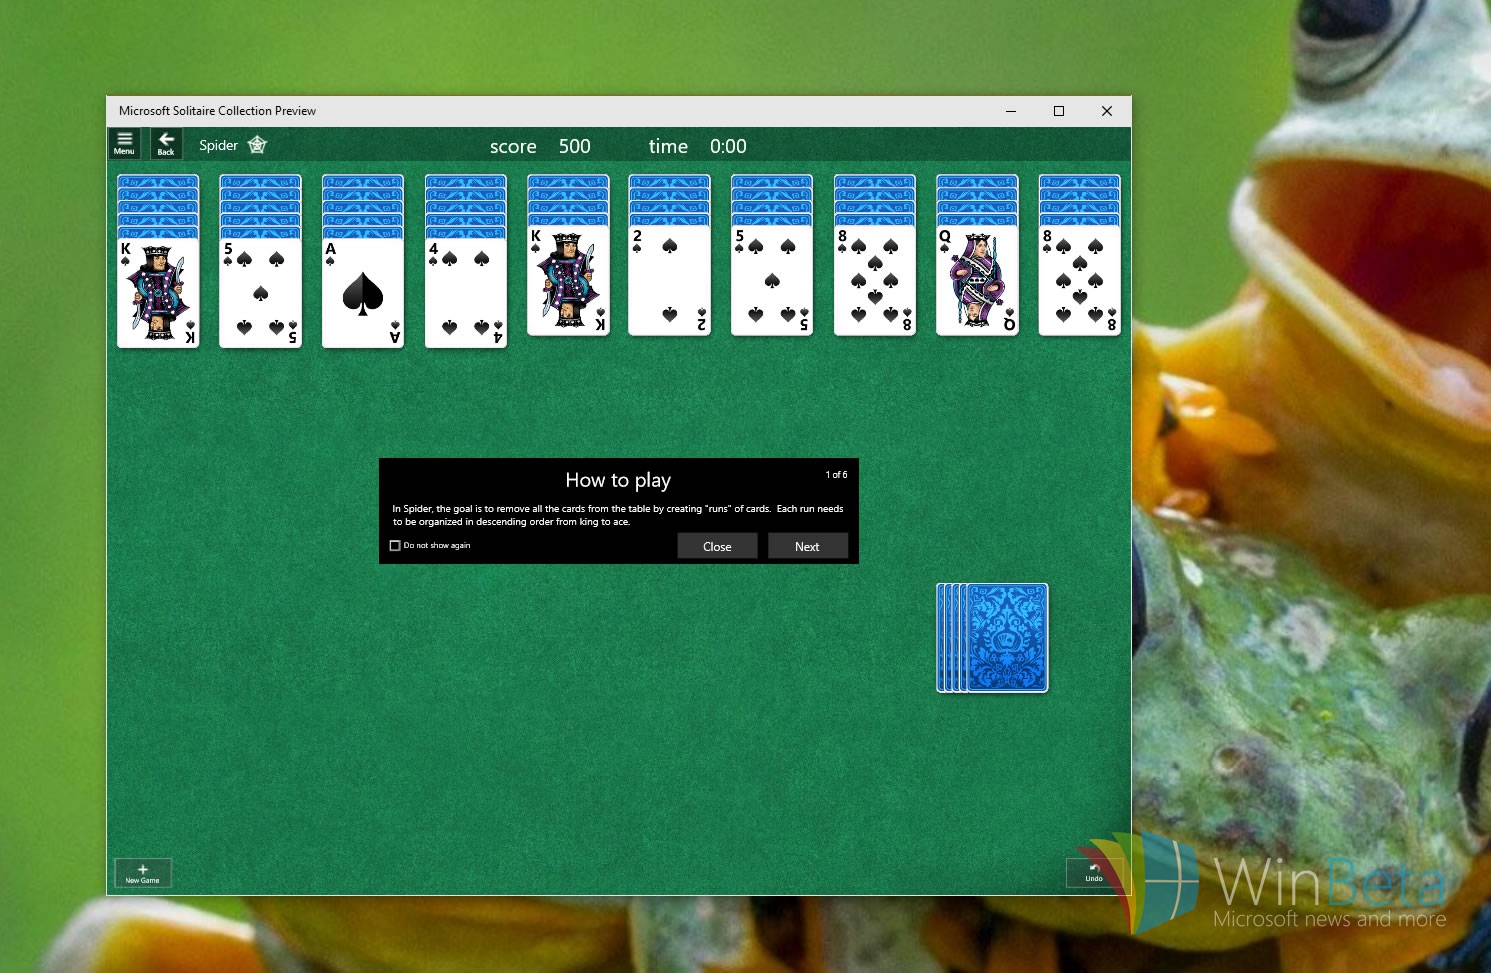 reinstall microsoft windows10 solitaire collection